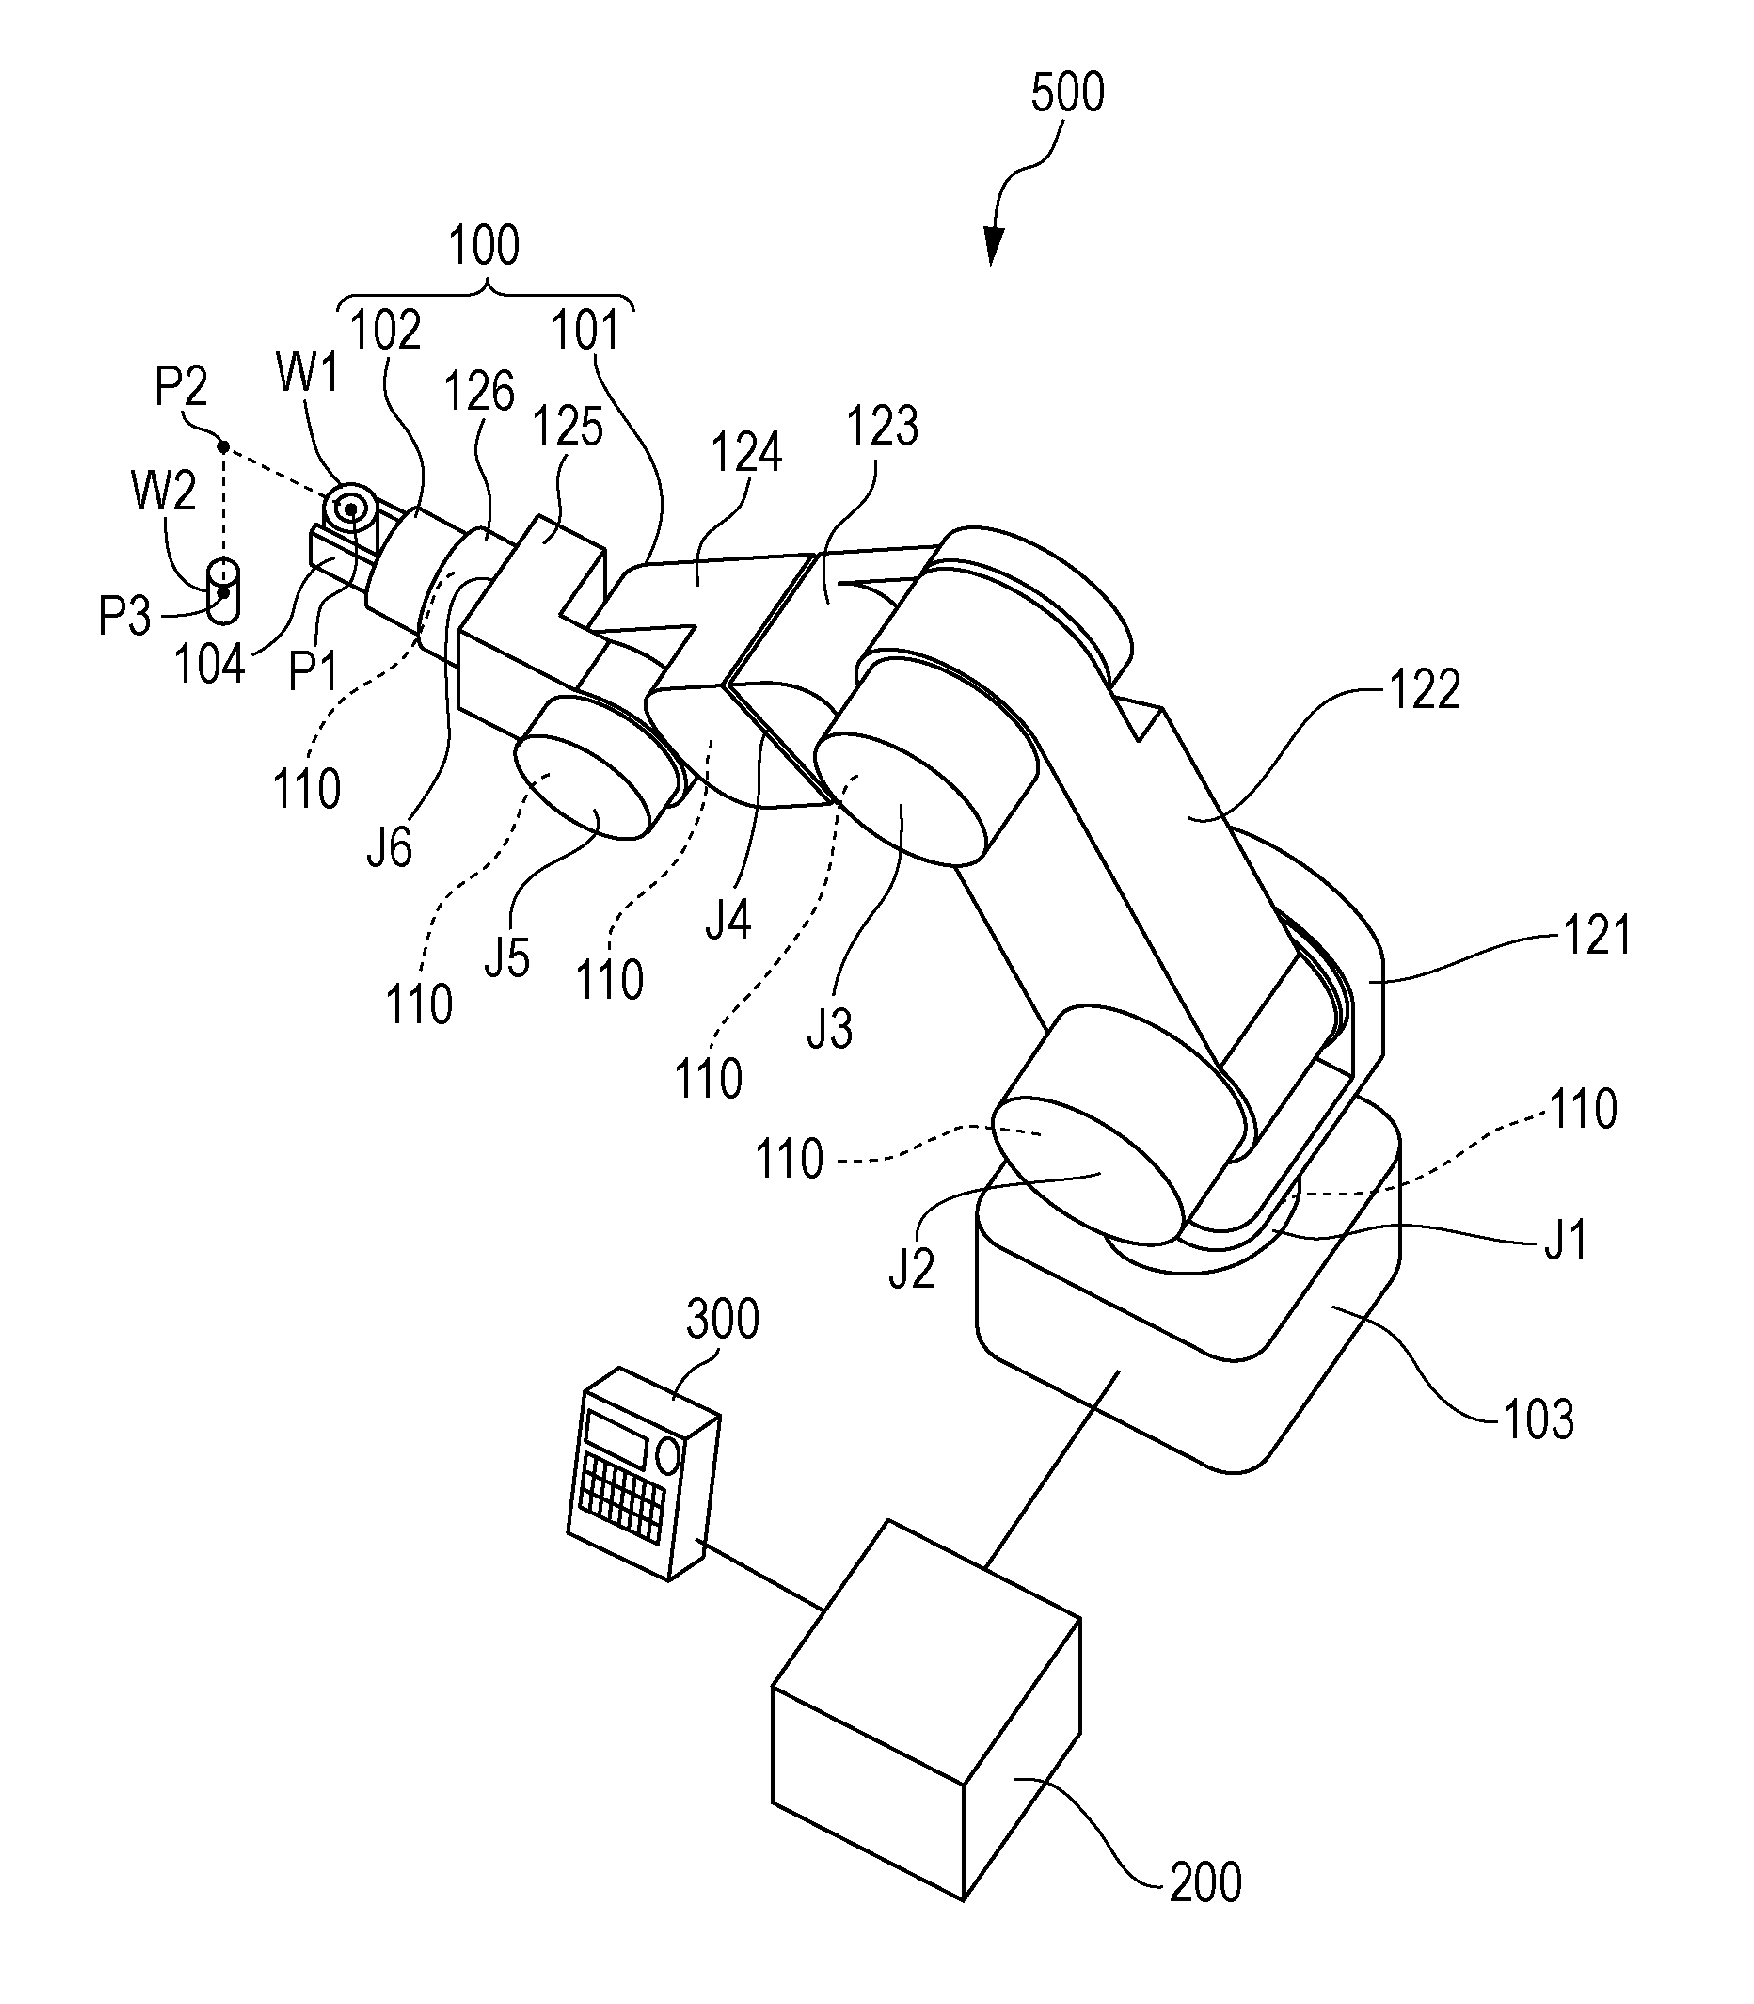 Robot controlling method, robot apparatus, program, recording medium, and method for manufacturing assembly component